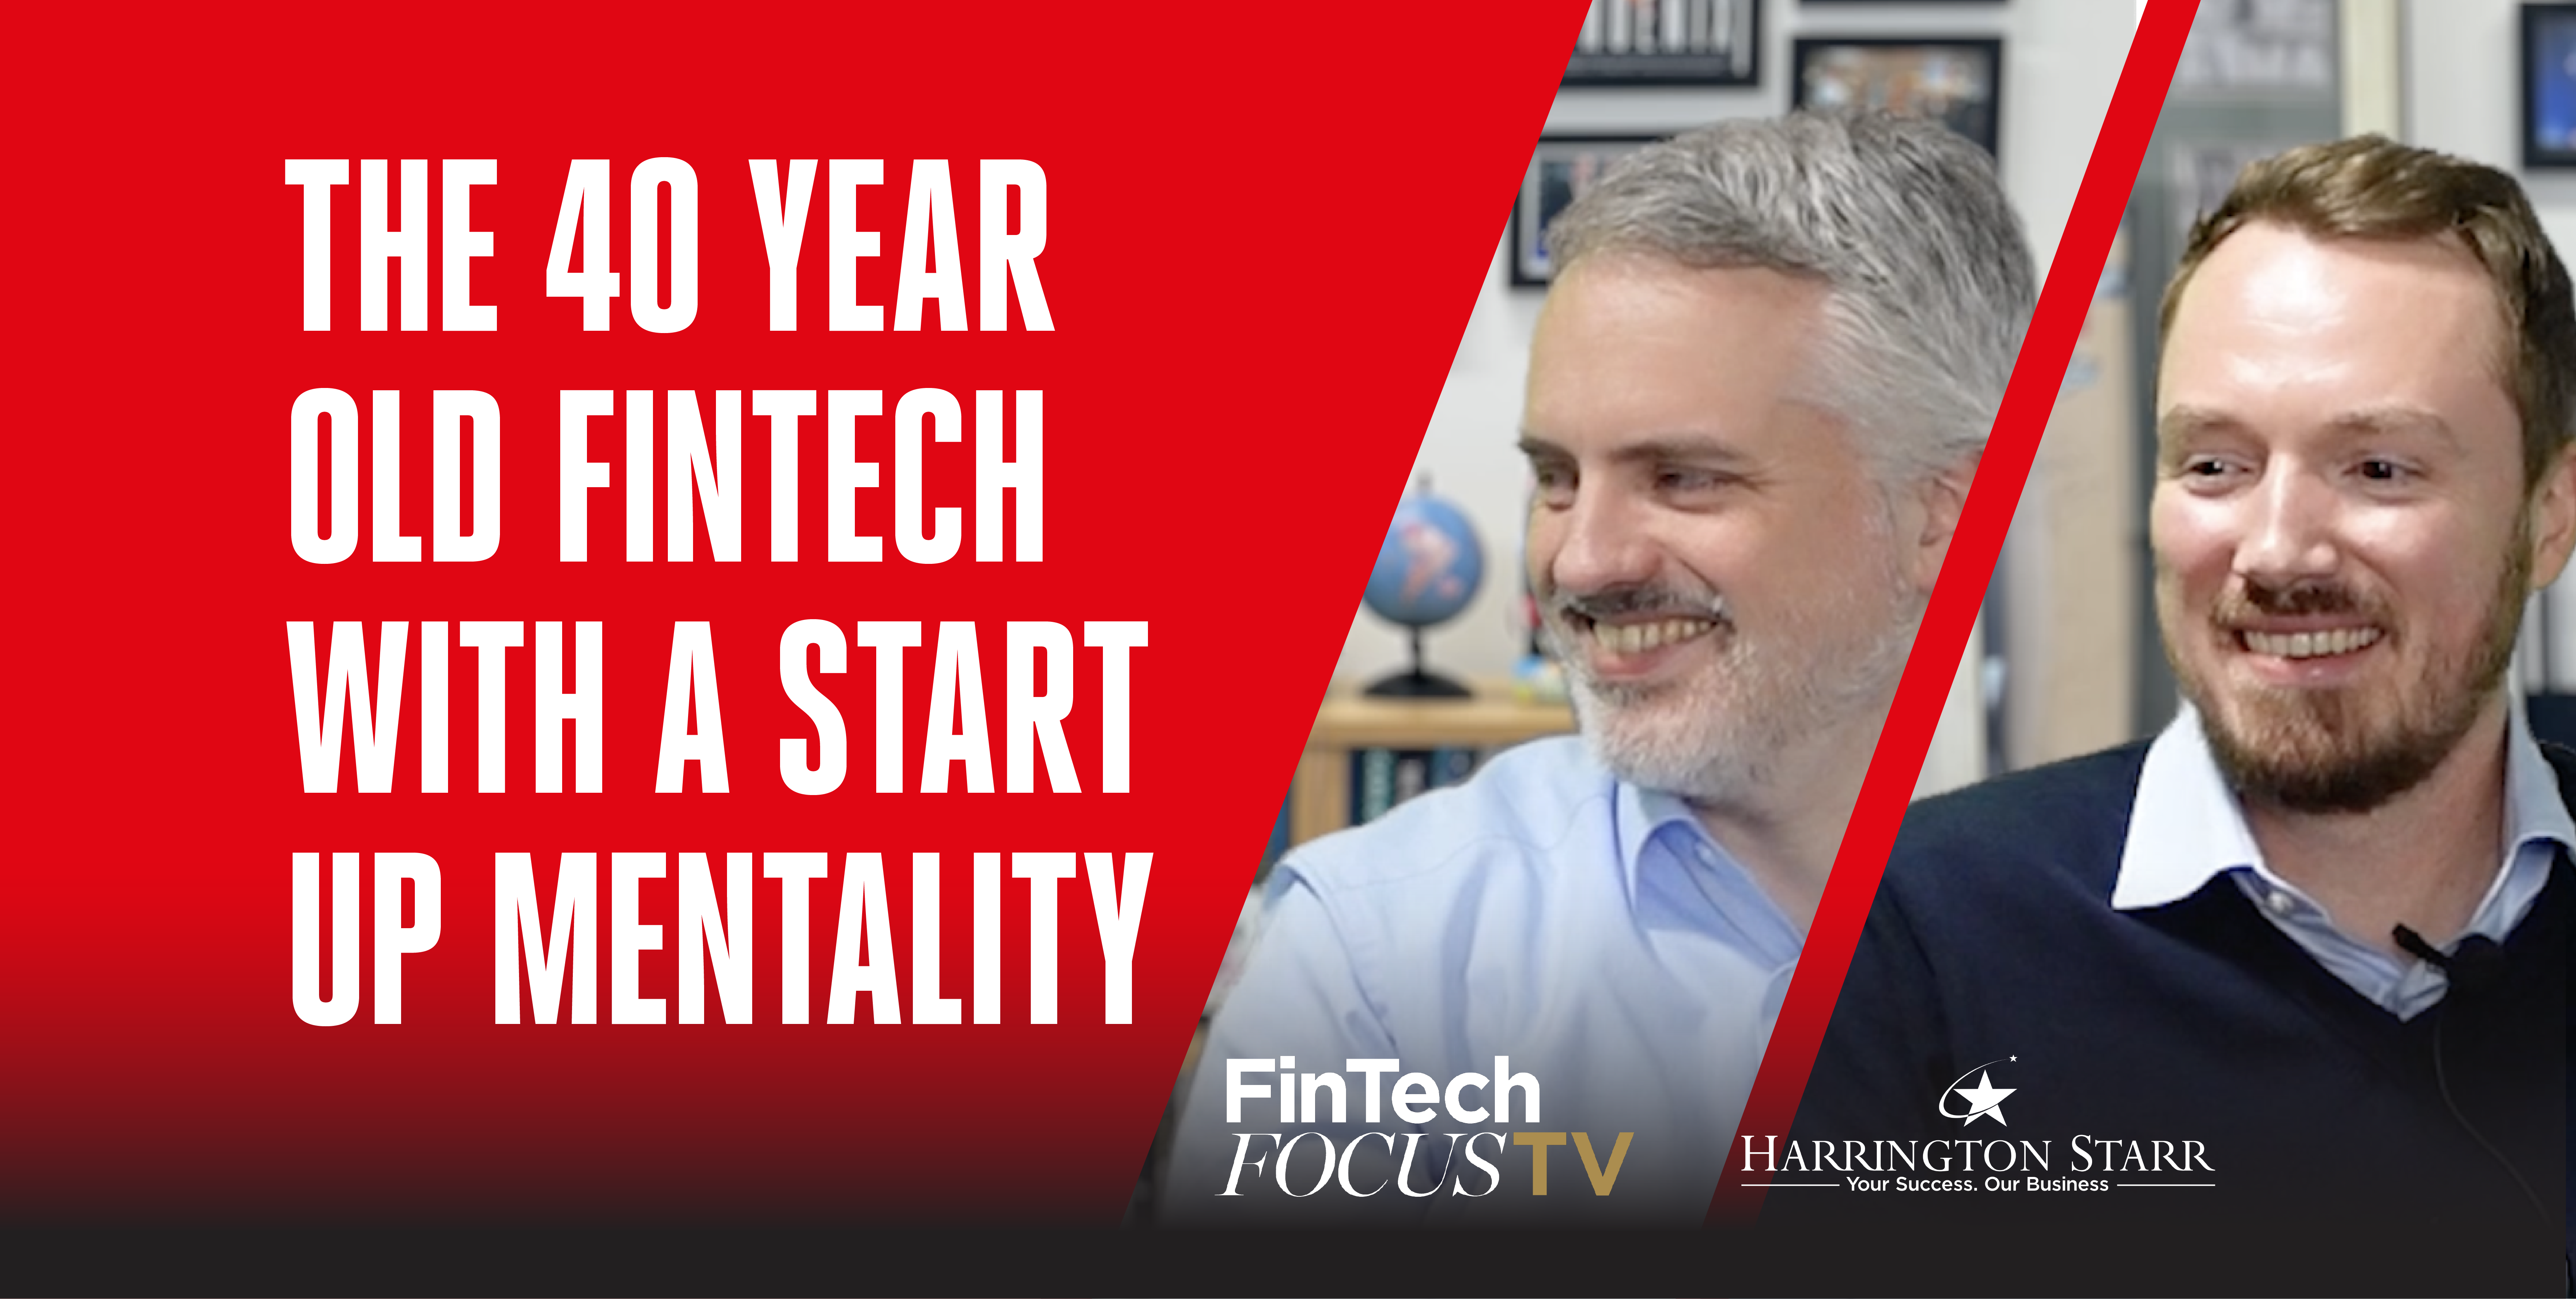 The 40 Year Old Fintech with a Start Up Mentality | FinTech Focus TV with Peer Joost and Stephan Von Massenbach at Digitec